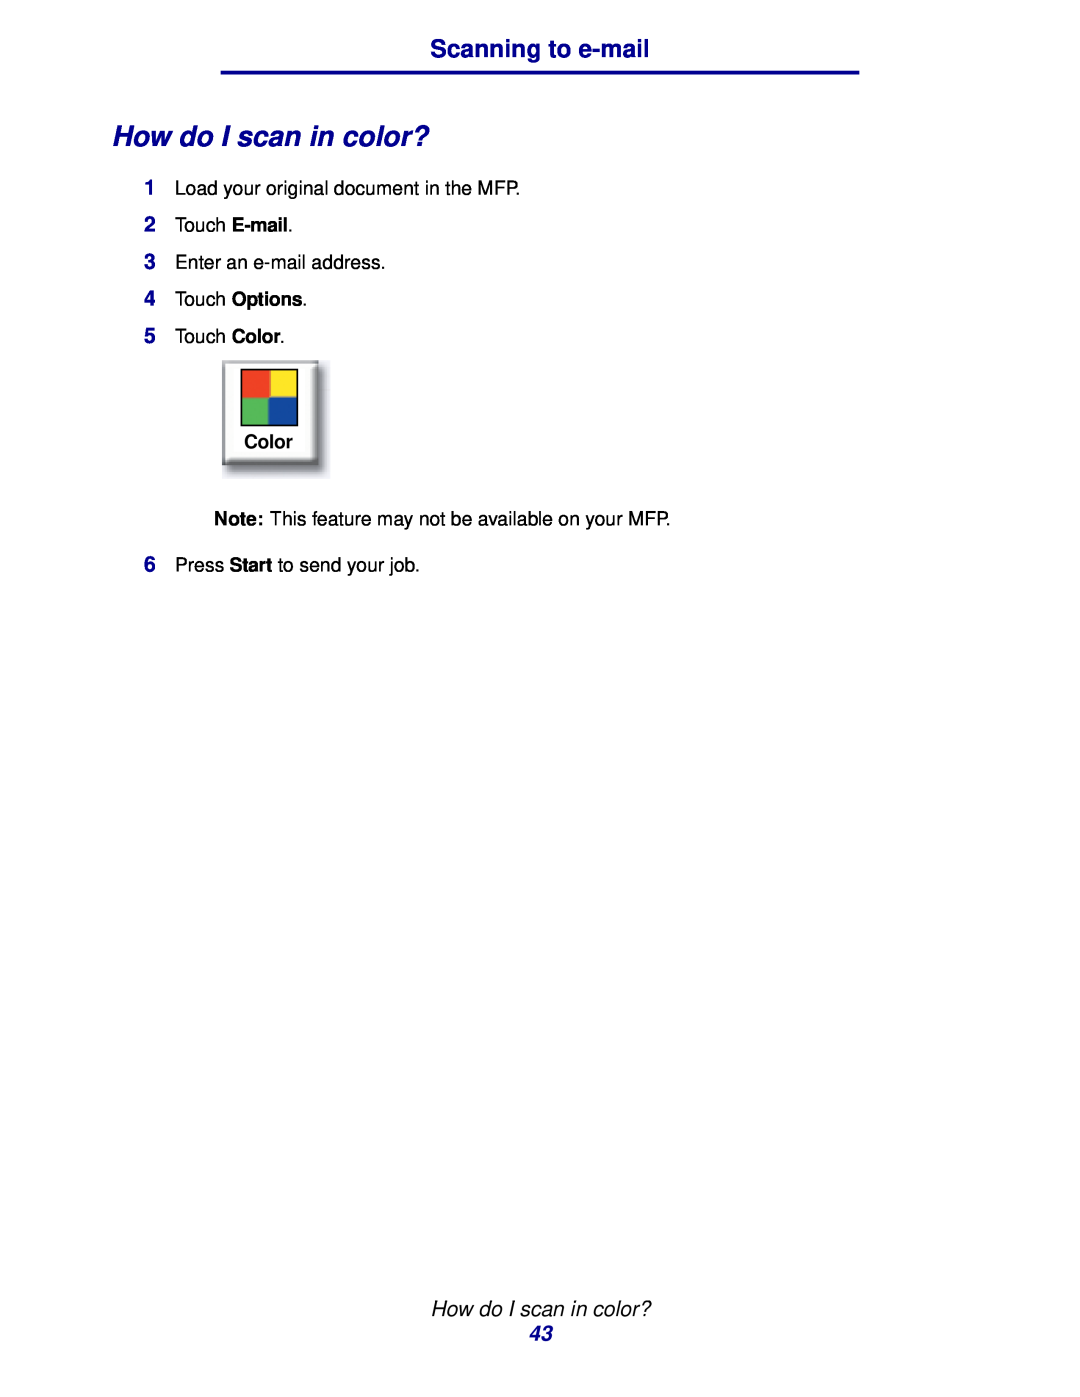 IBM MFP 30, MFP 35 manual How do I scan in color?, Scanning to e-mail, Color 